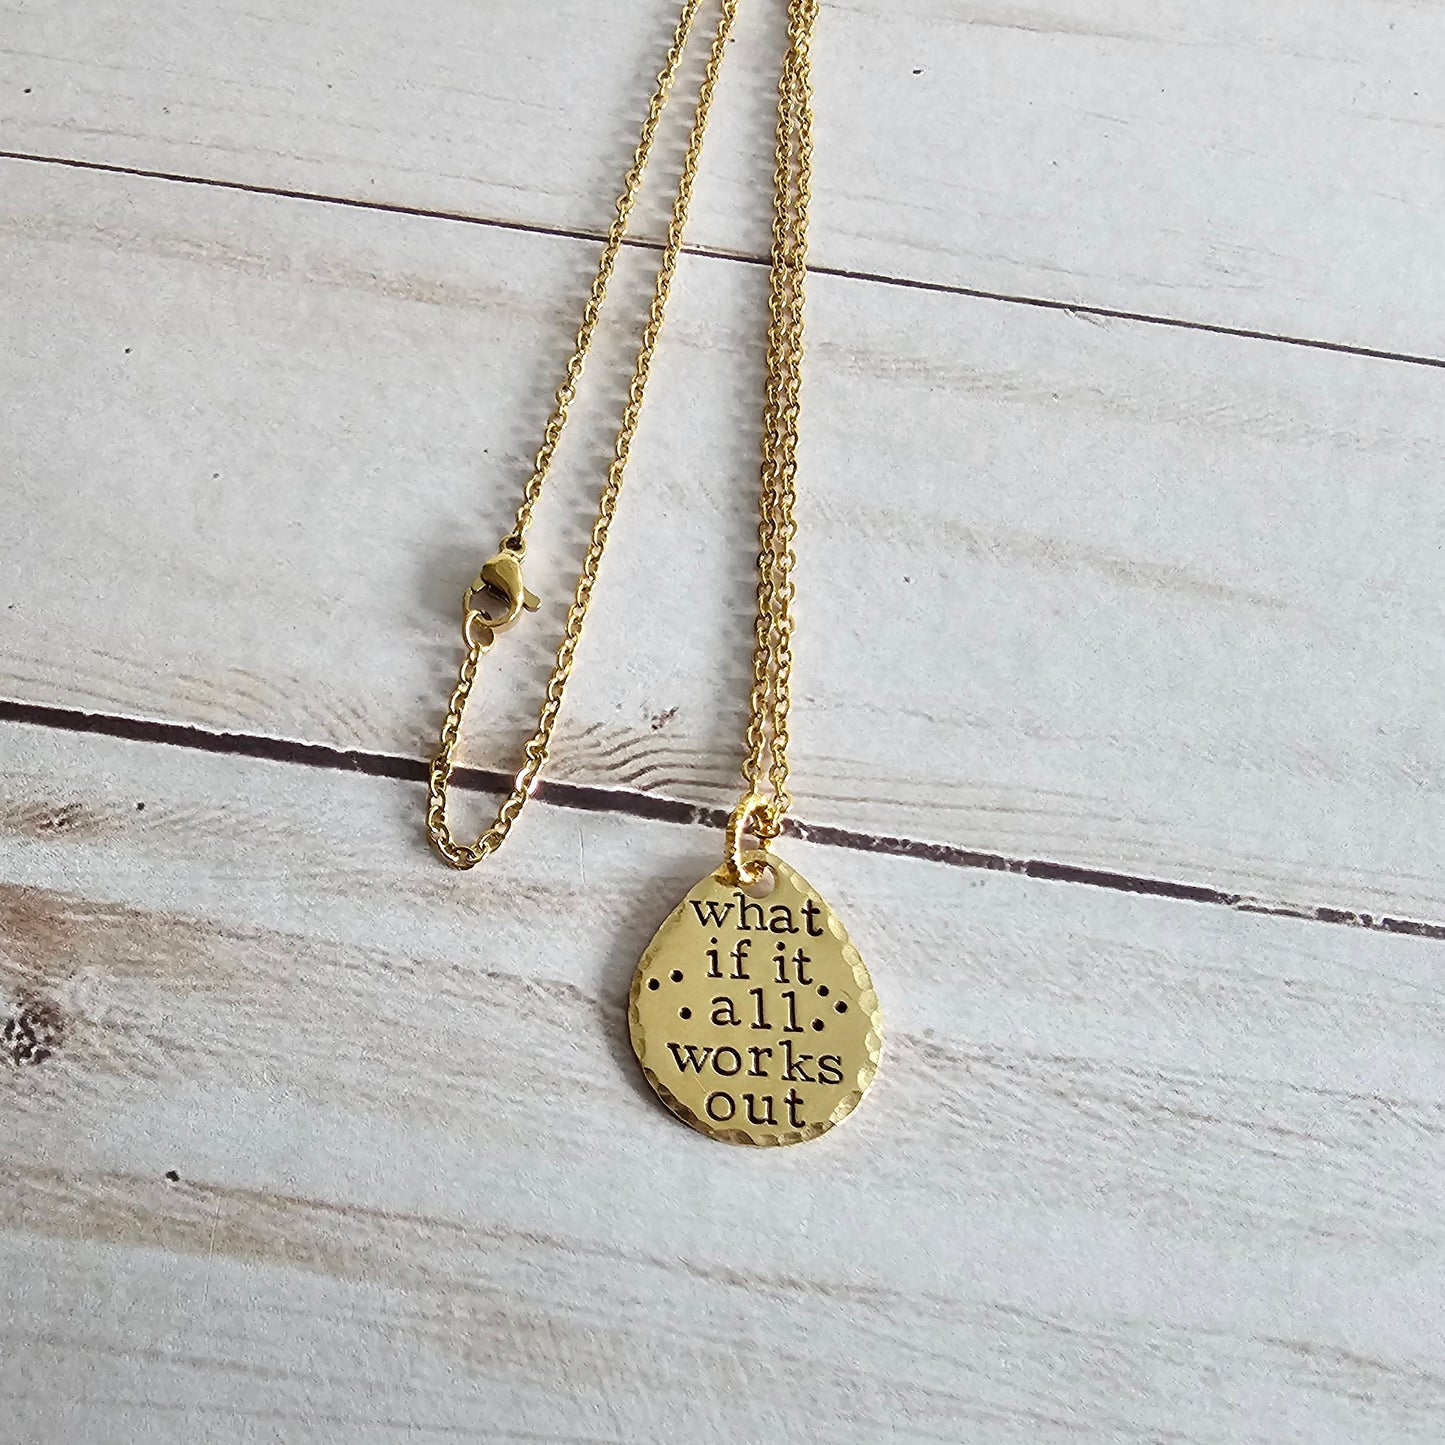 Brass Drop Necklace, Trendy Jewelry, Choose Your Saying - Just Breathe, Proud Mama, What If It All Works Out, You Are Loved